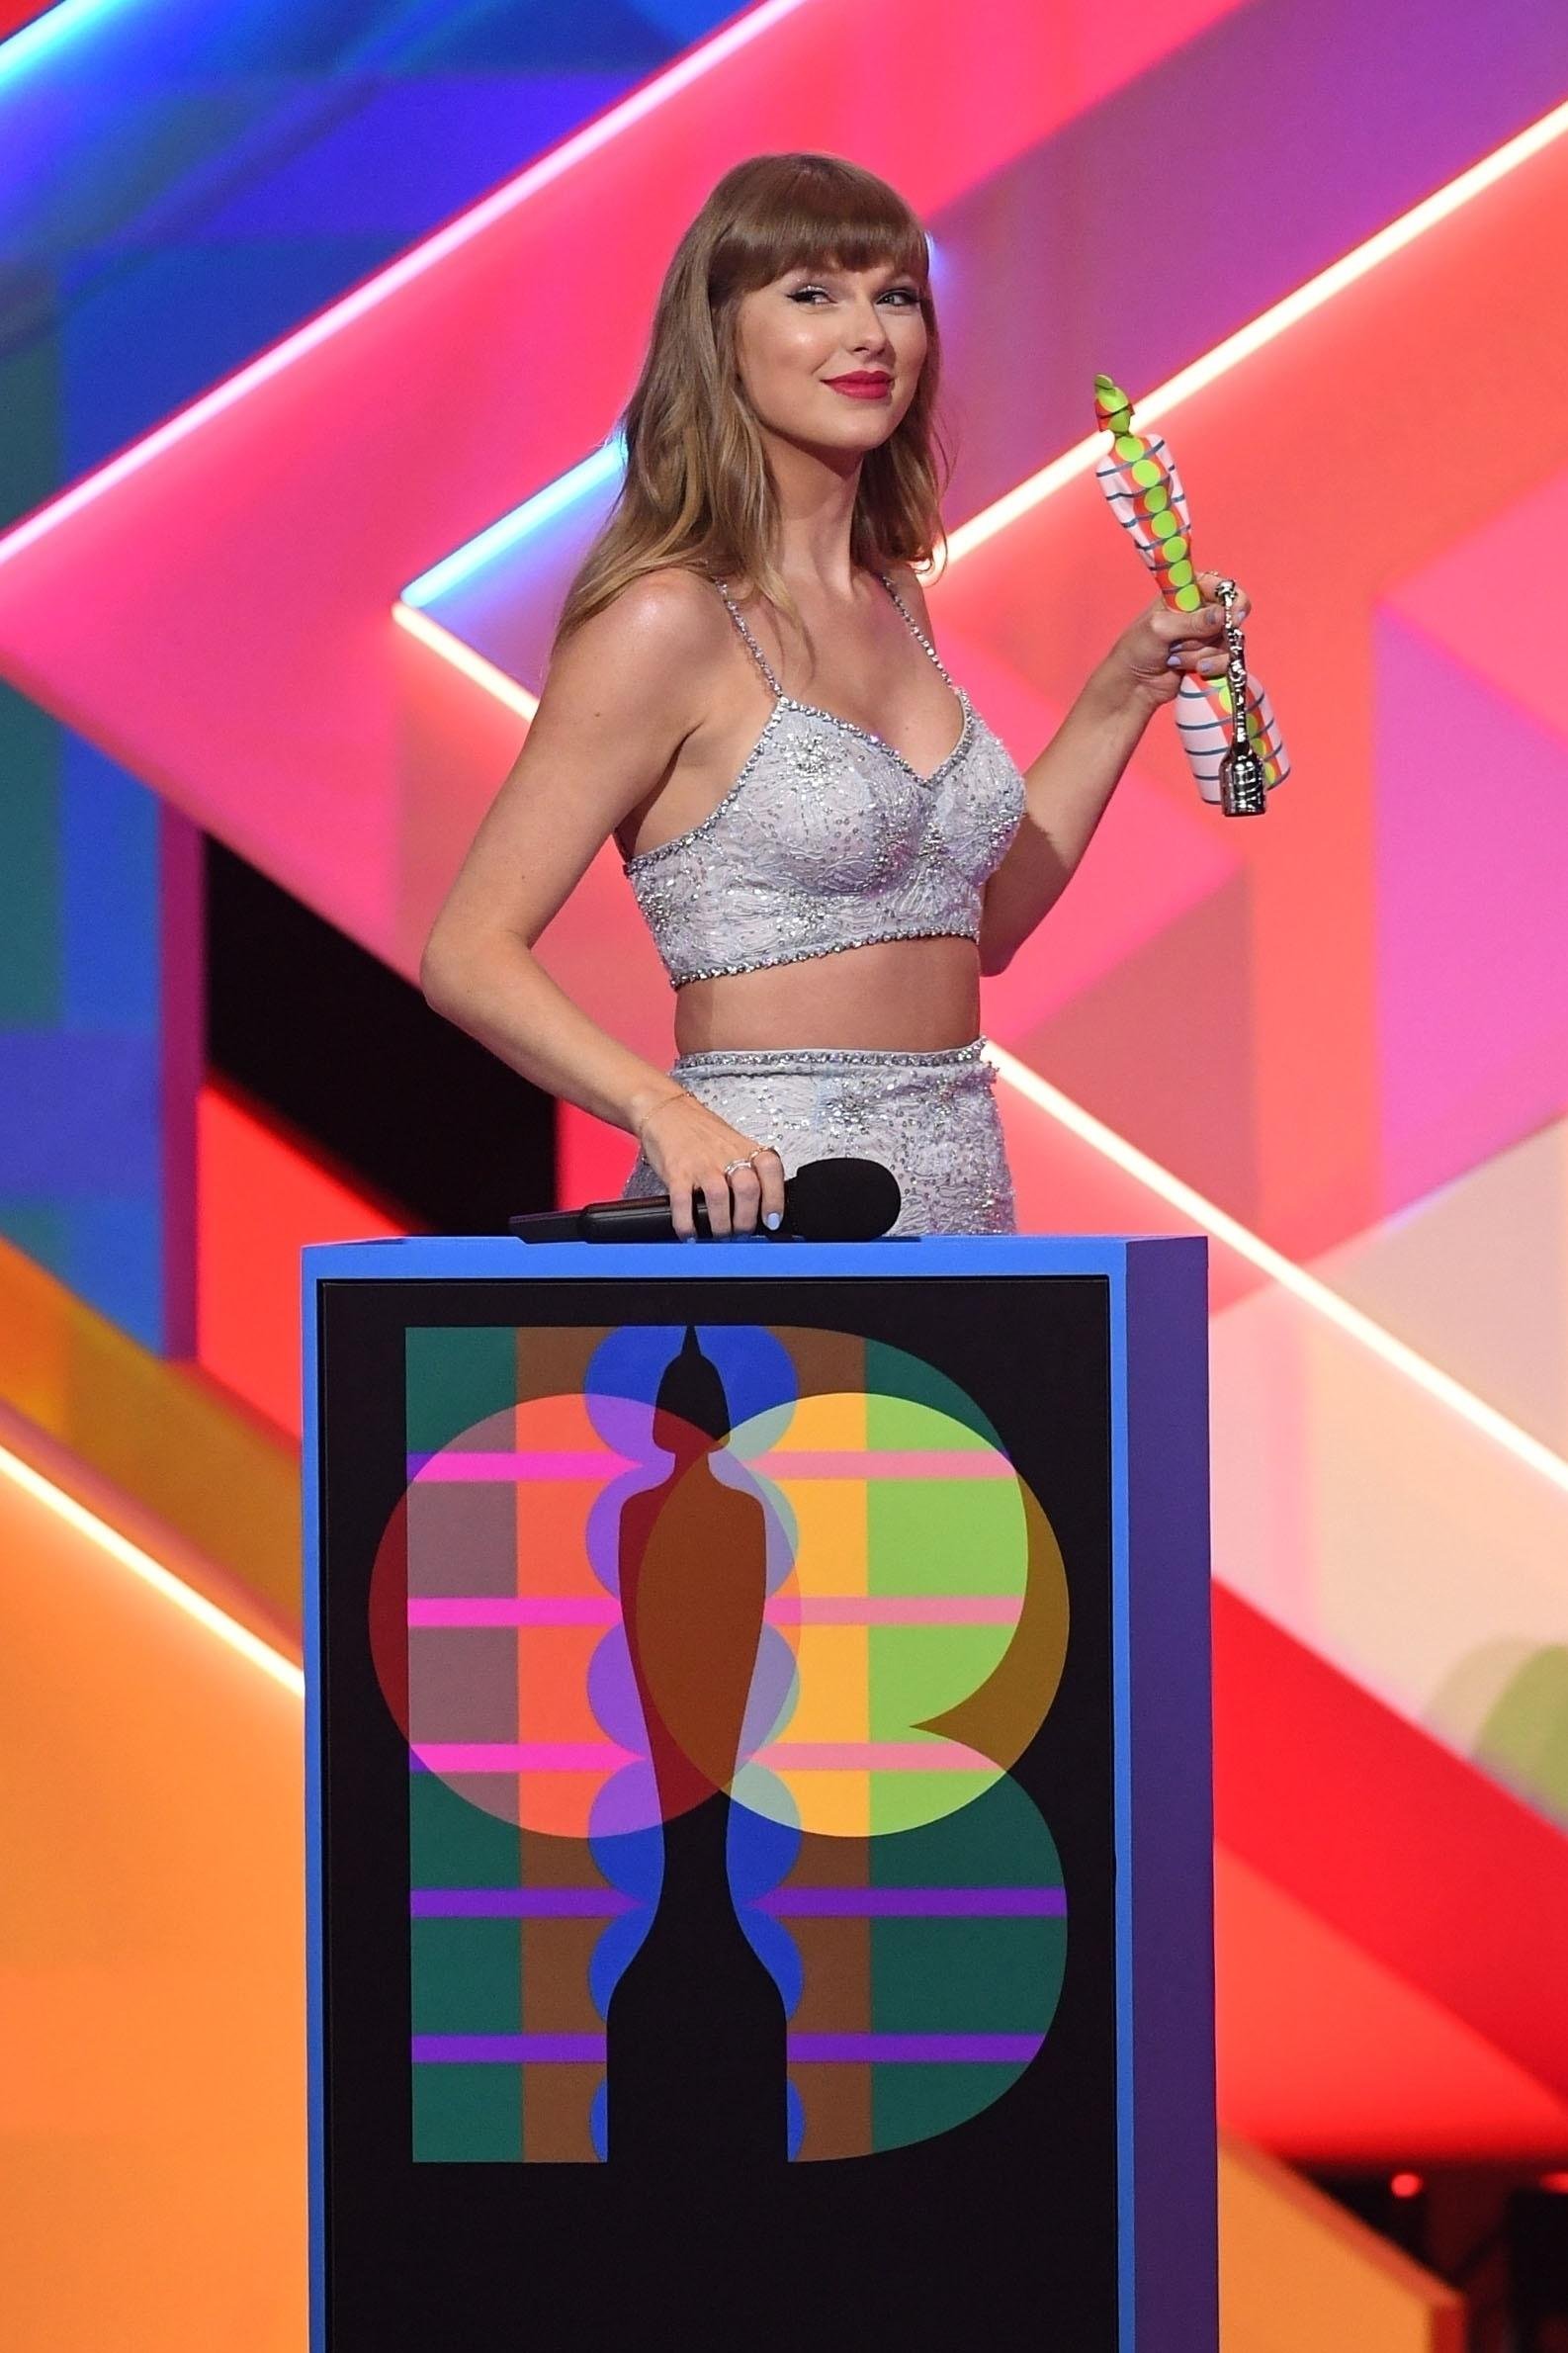 Taylor Swift has entered the history of the Brit Awards